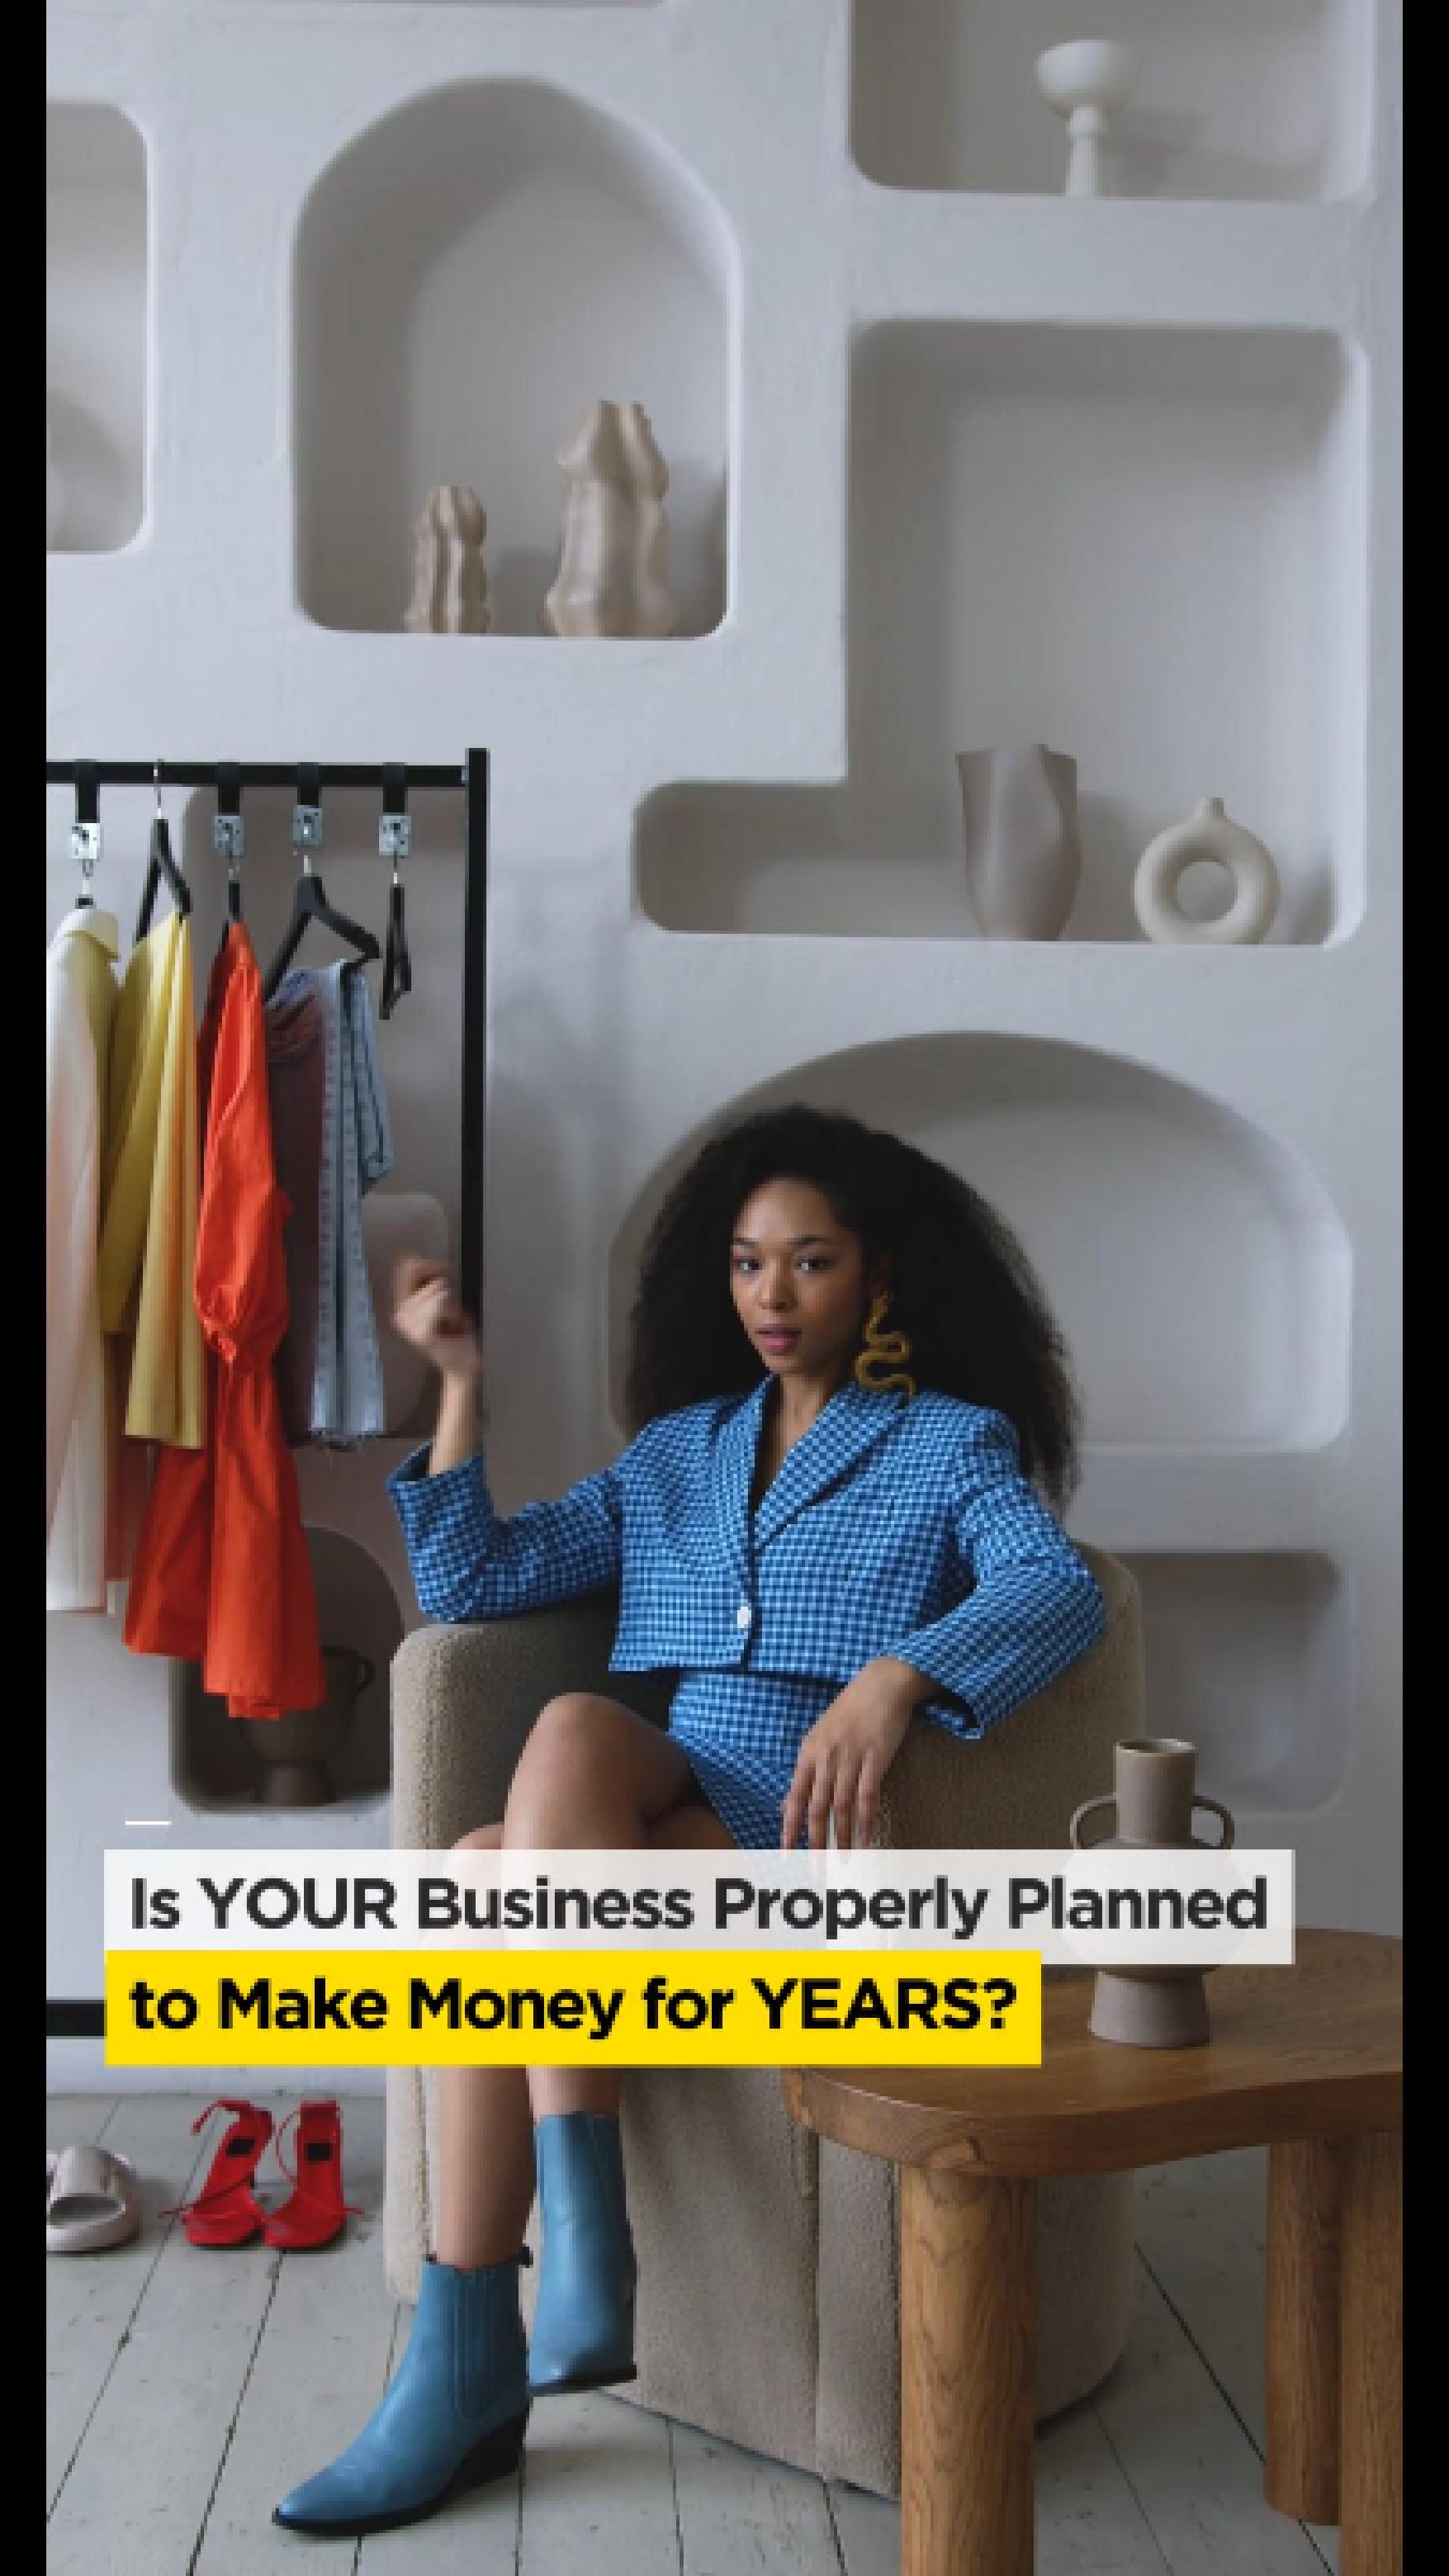 Is a Pesky Business Plan Keeping You From Your Dreams?